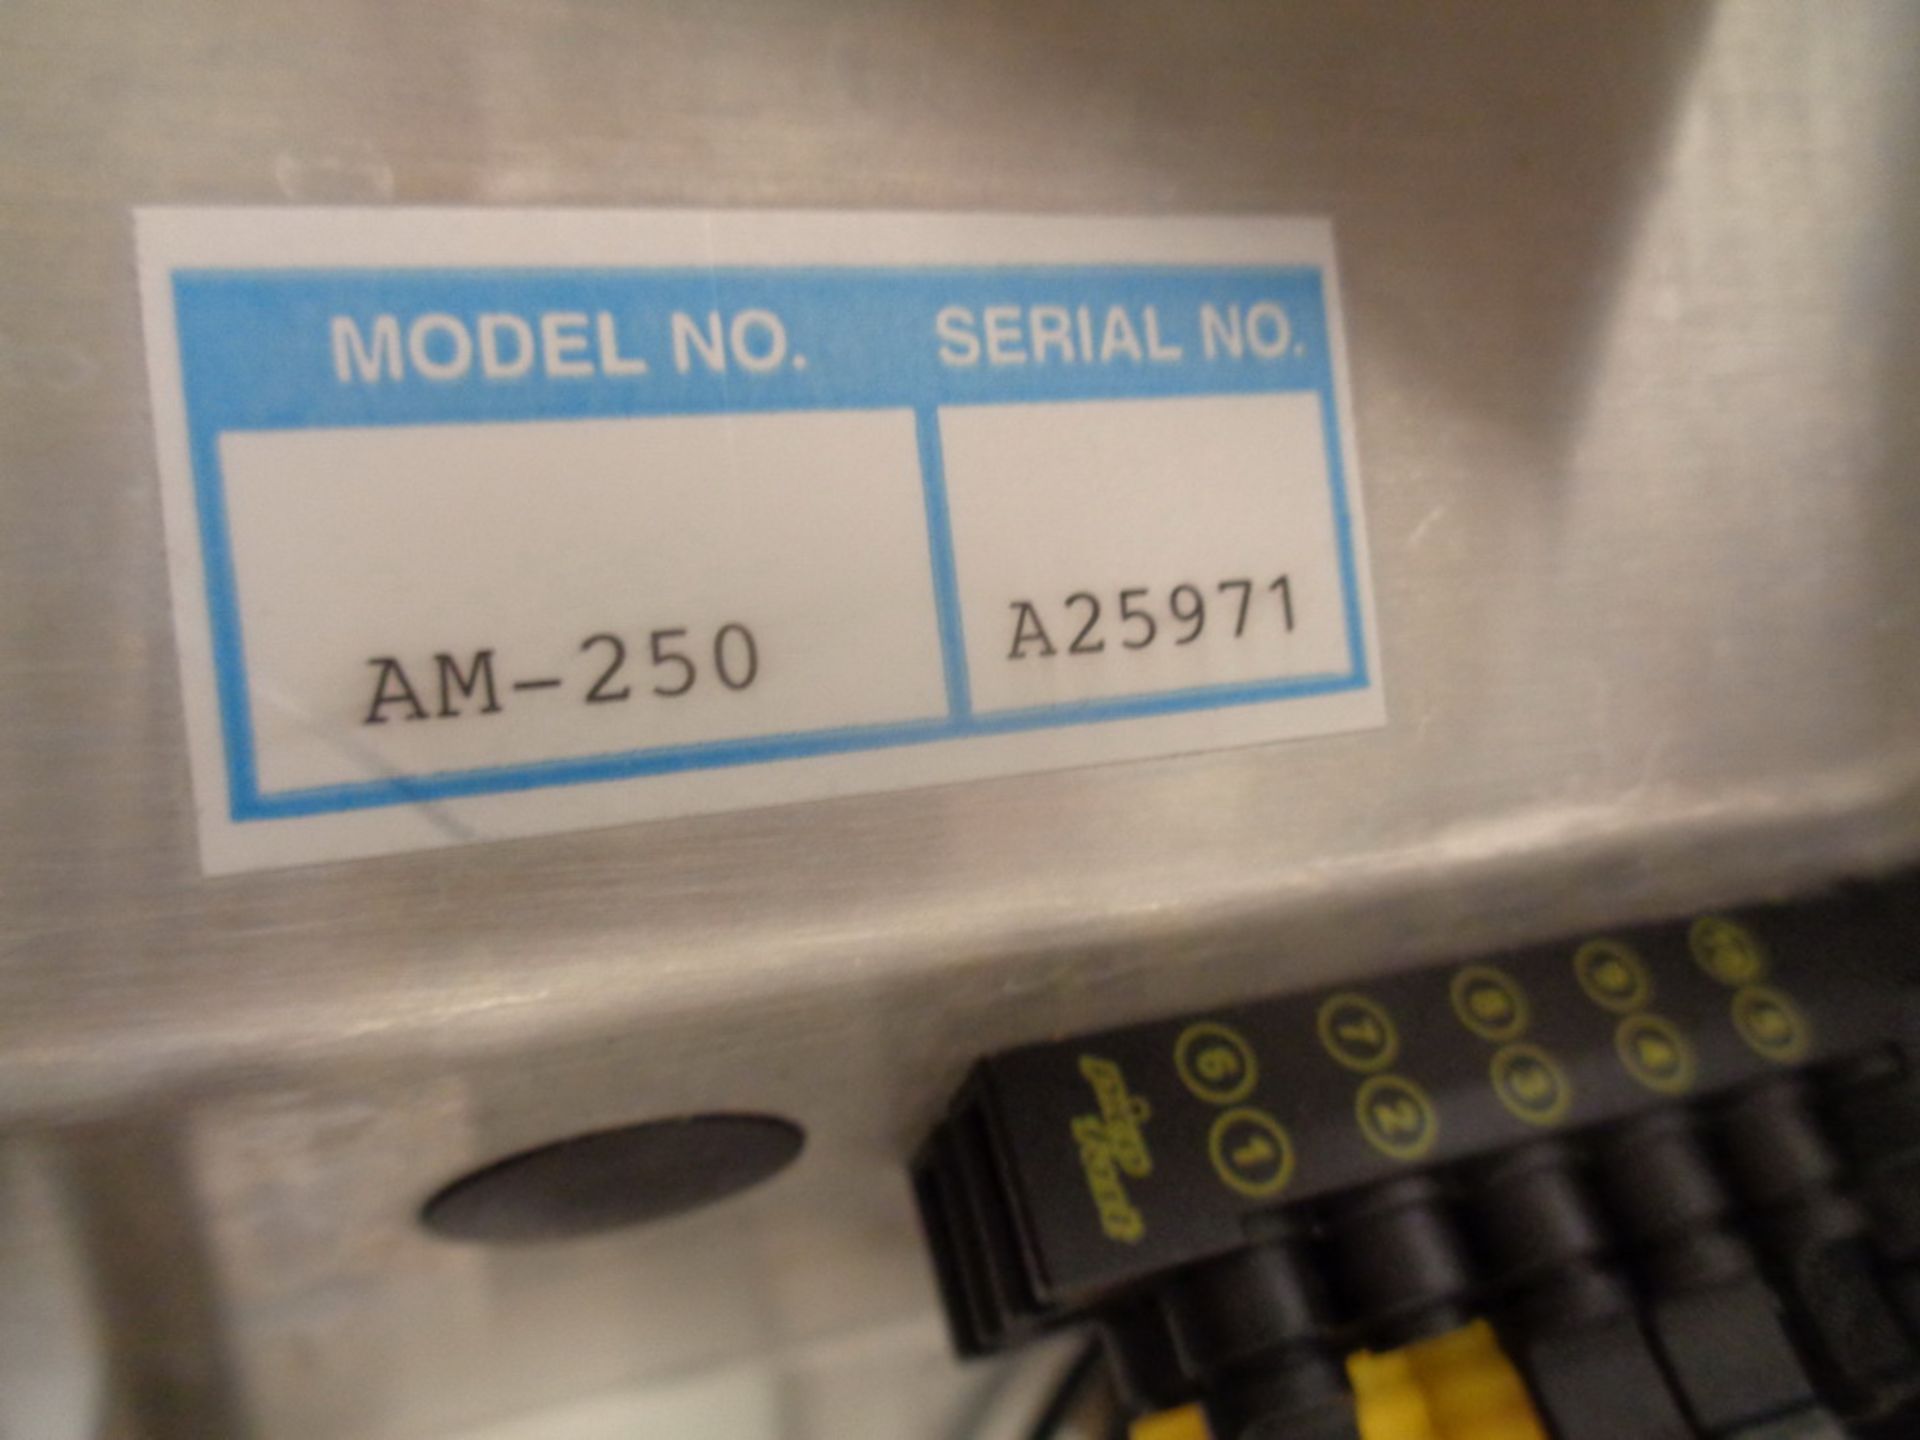 AUTOMATE INDUCTION CAP SEALER, MODEL AM-250, SERIAL NUMBER A25971, SEE AUCTIONEER NOTE - Image 4 of 8